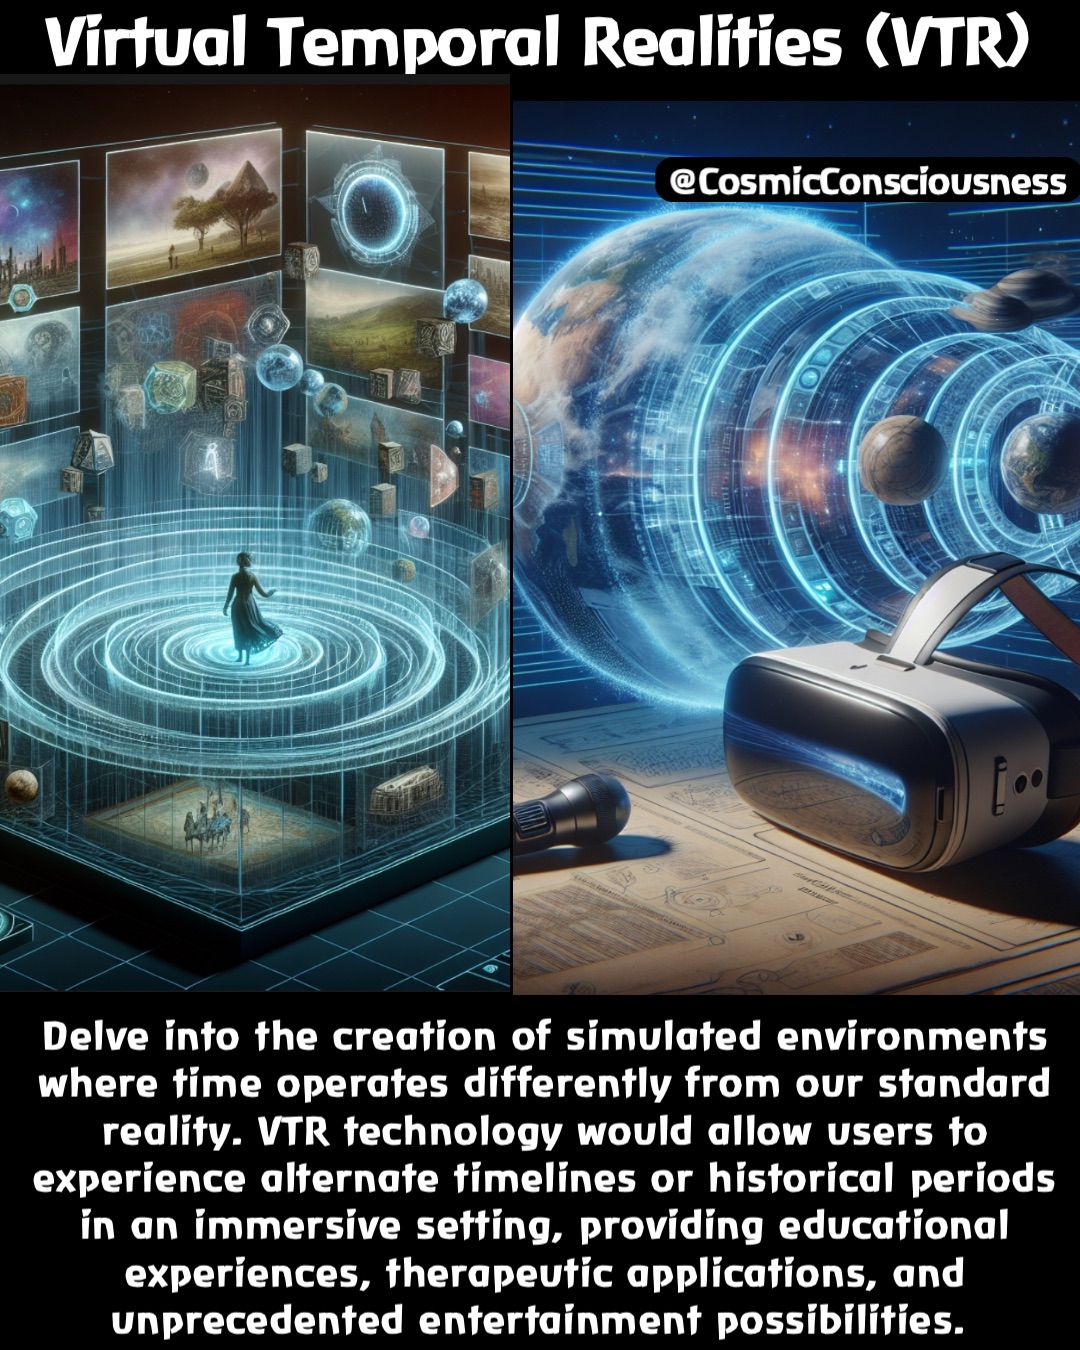 Delve into the creation of simulated environments where time operates differently from our standard reality. VTR technology would allow users to experience alternate timelines or historical periods in an immersive setting, providing educational experiences, therapeutic applications, and unprecedented entertainment possibilities. Virtual Temporal Realities (VTR) @CosmicConsciousness